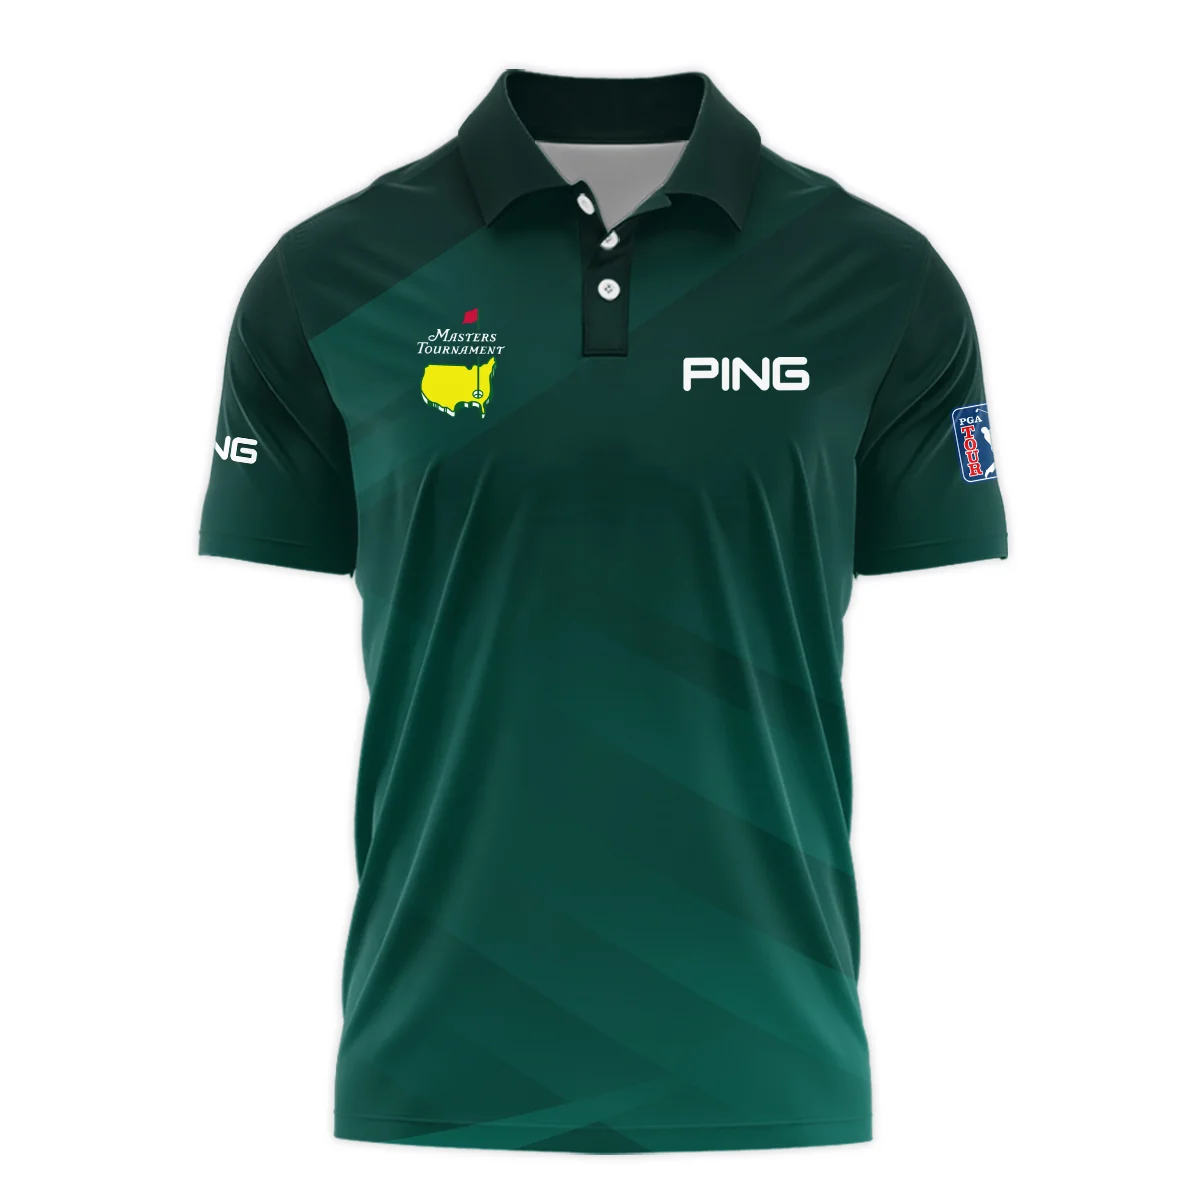 Masters Tournament Dark Green Gradient Golf Sport Ping Vneck Polo Shirt Style Classic Polo Shirt For Men